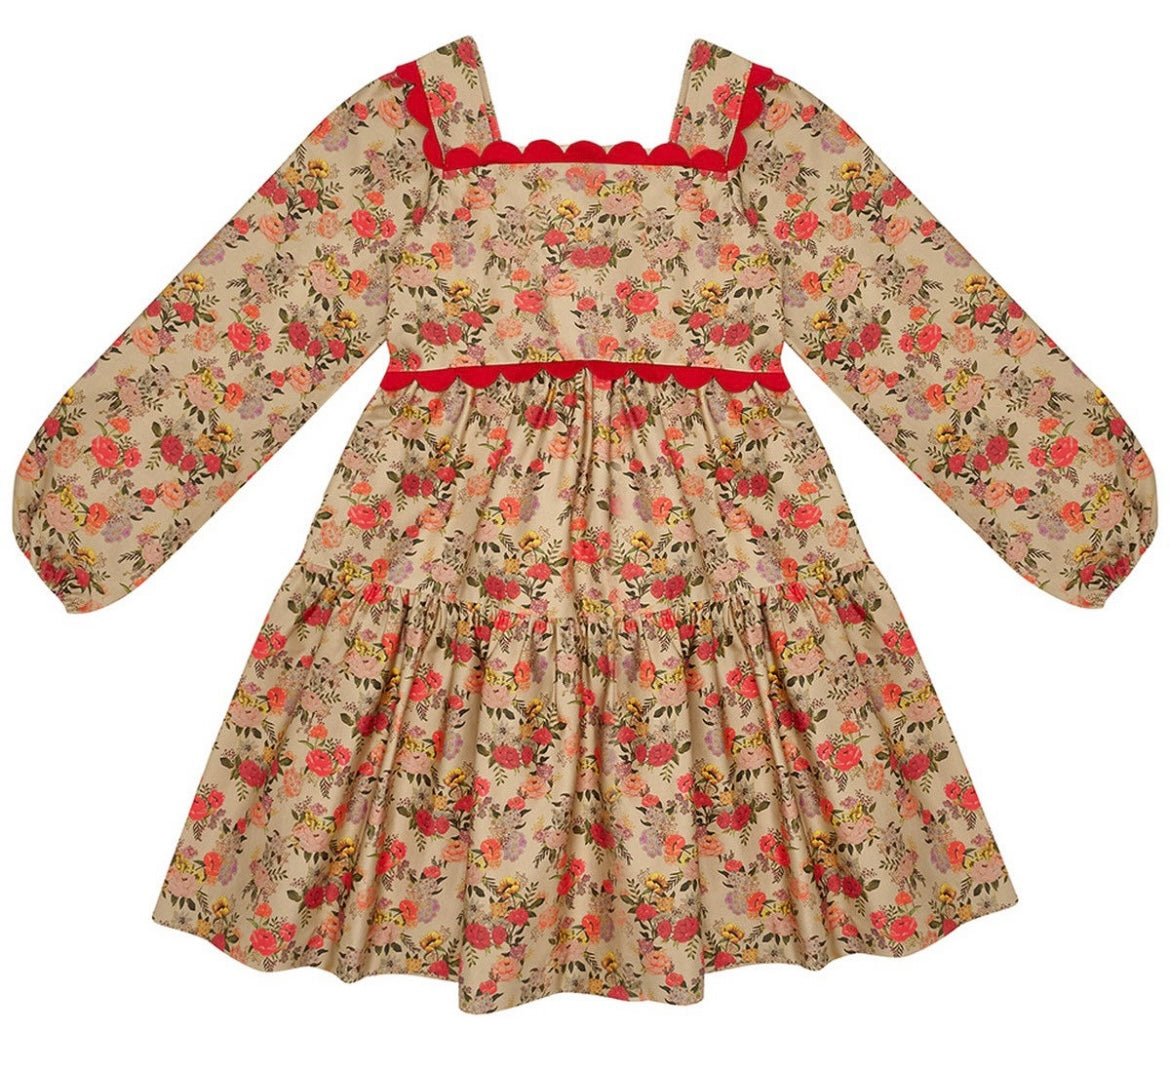 The Middle Daughter Stately Floral Queen Scallop Dress